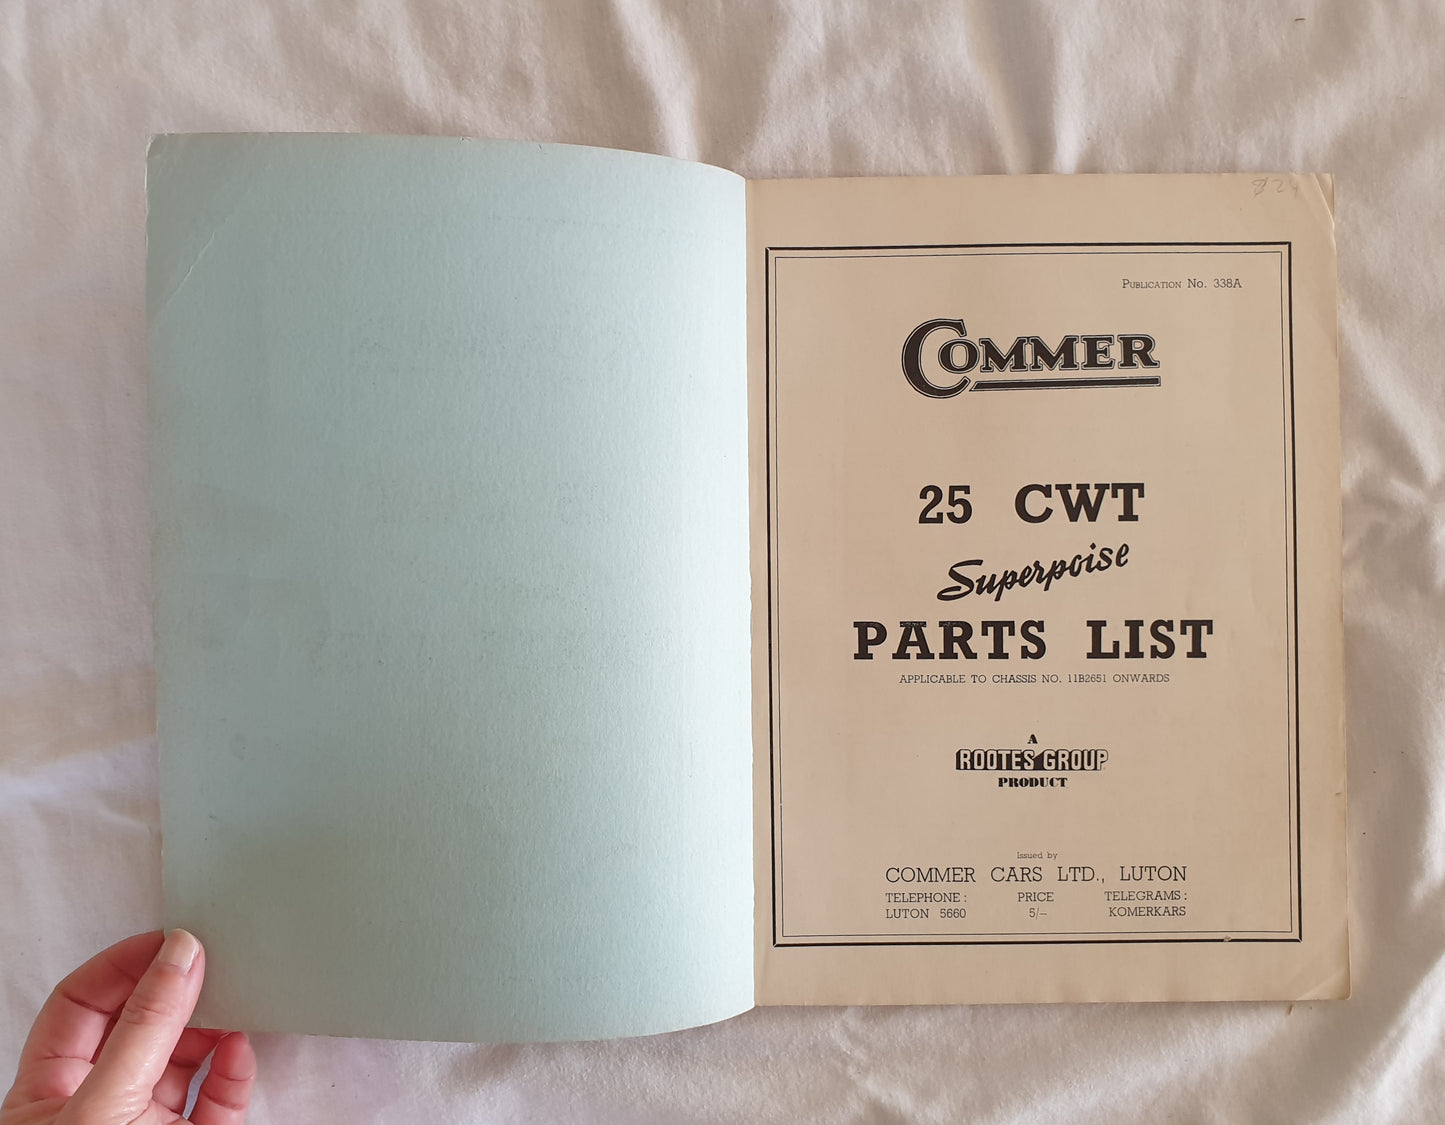 Commer 25 CWT Superpoise Parts List